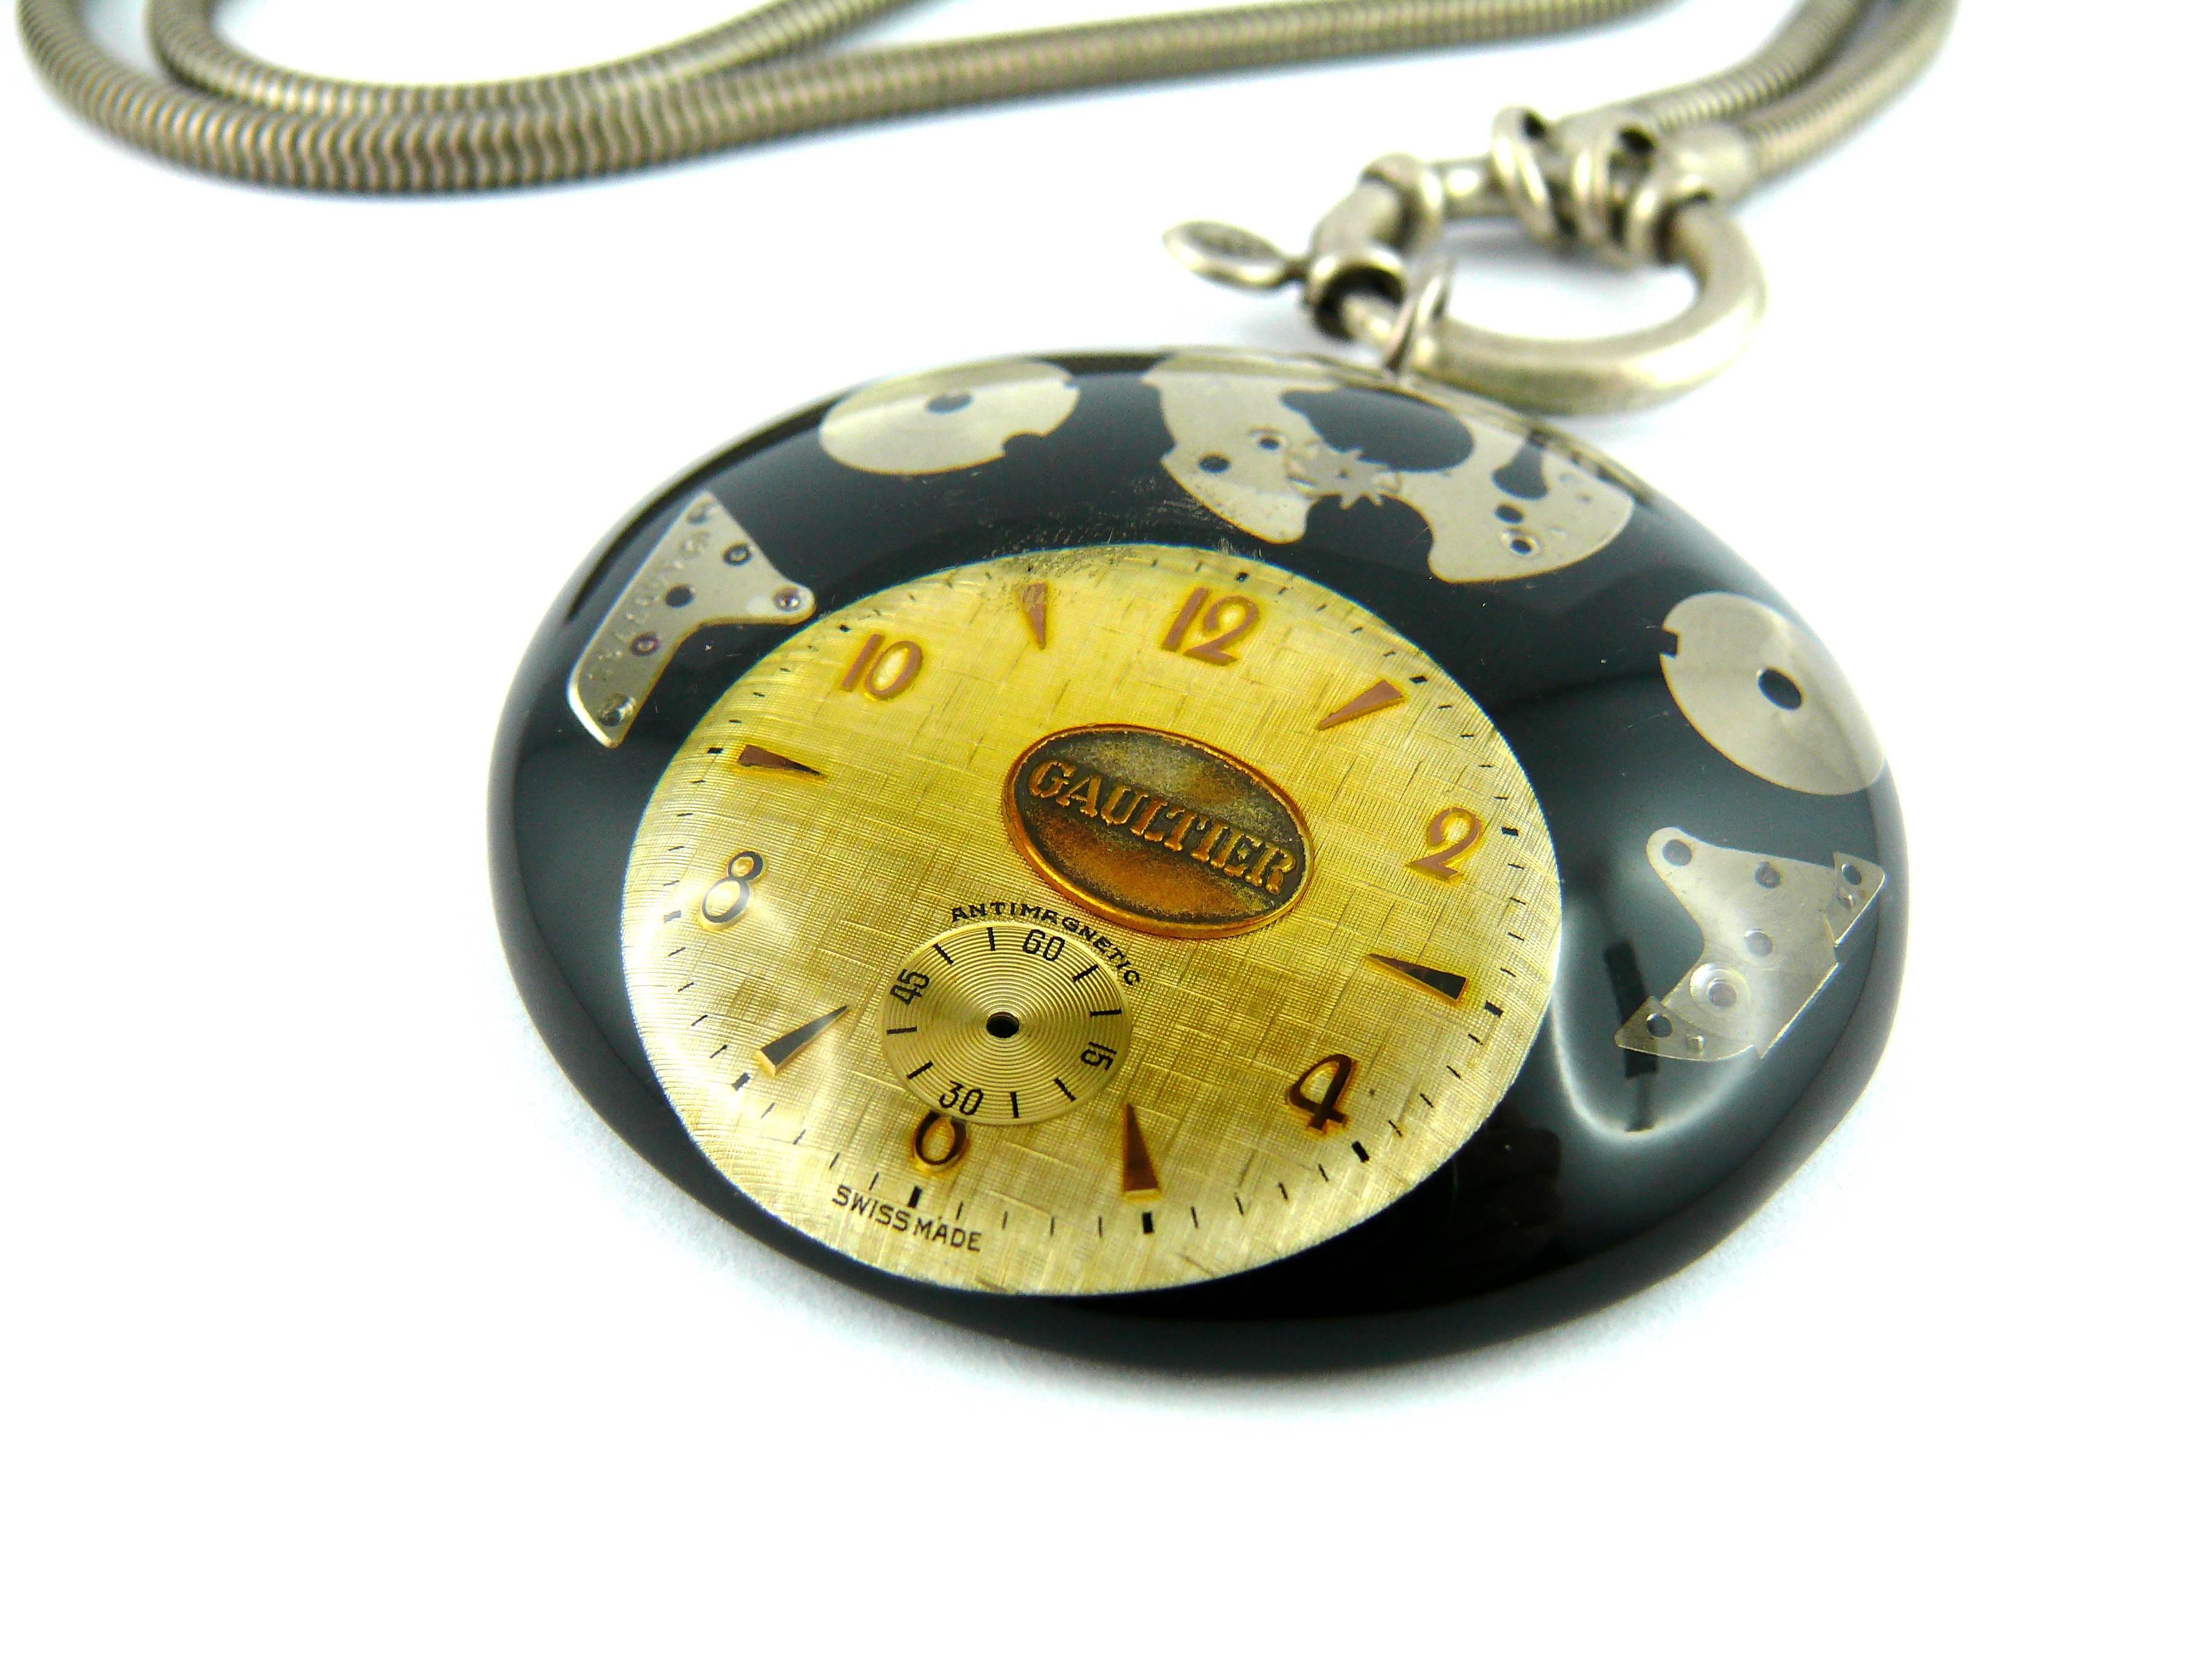 JEAN PAUL GAULTIER vintage rare and collectable steampunk clock necklace.

Chunky steel metal snake chain featuring a massive domed resin pendant with a clock inlaid. 

Marked GAULTIER.

Indicative measurements : total length worn approx. 42.5 cm